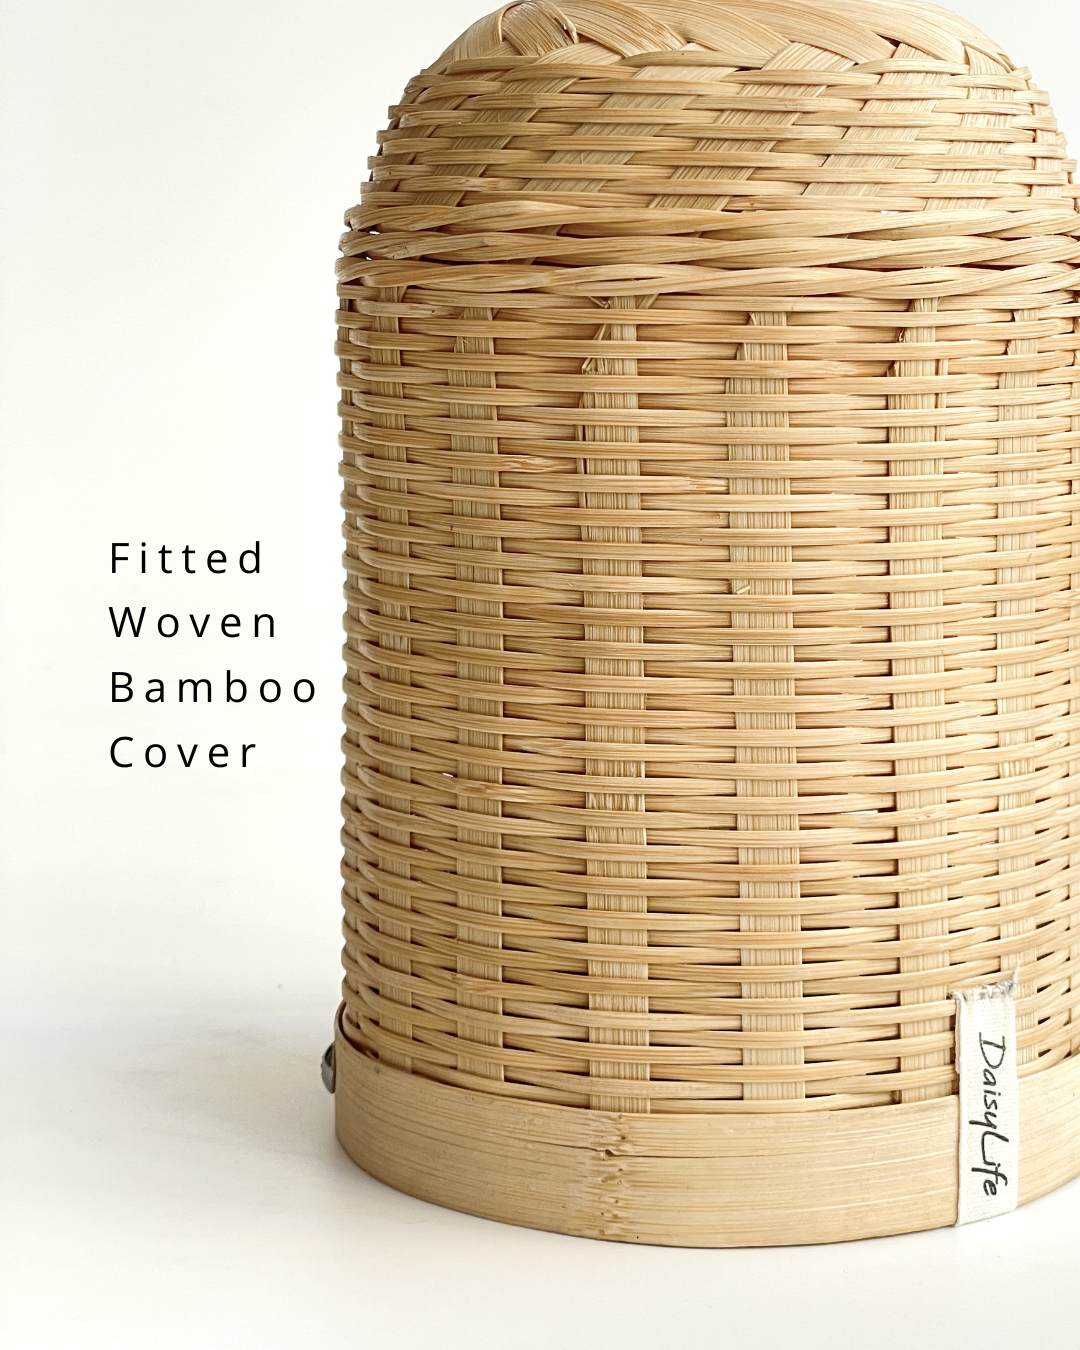 Fitted Woven Bamboo Cover